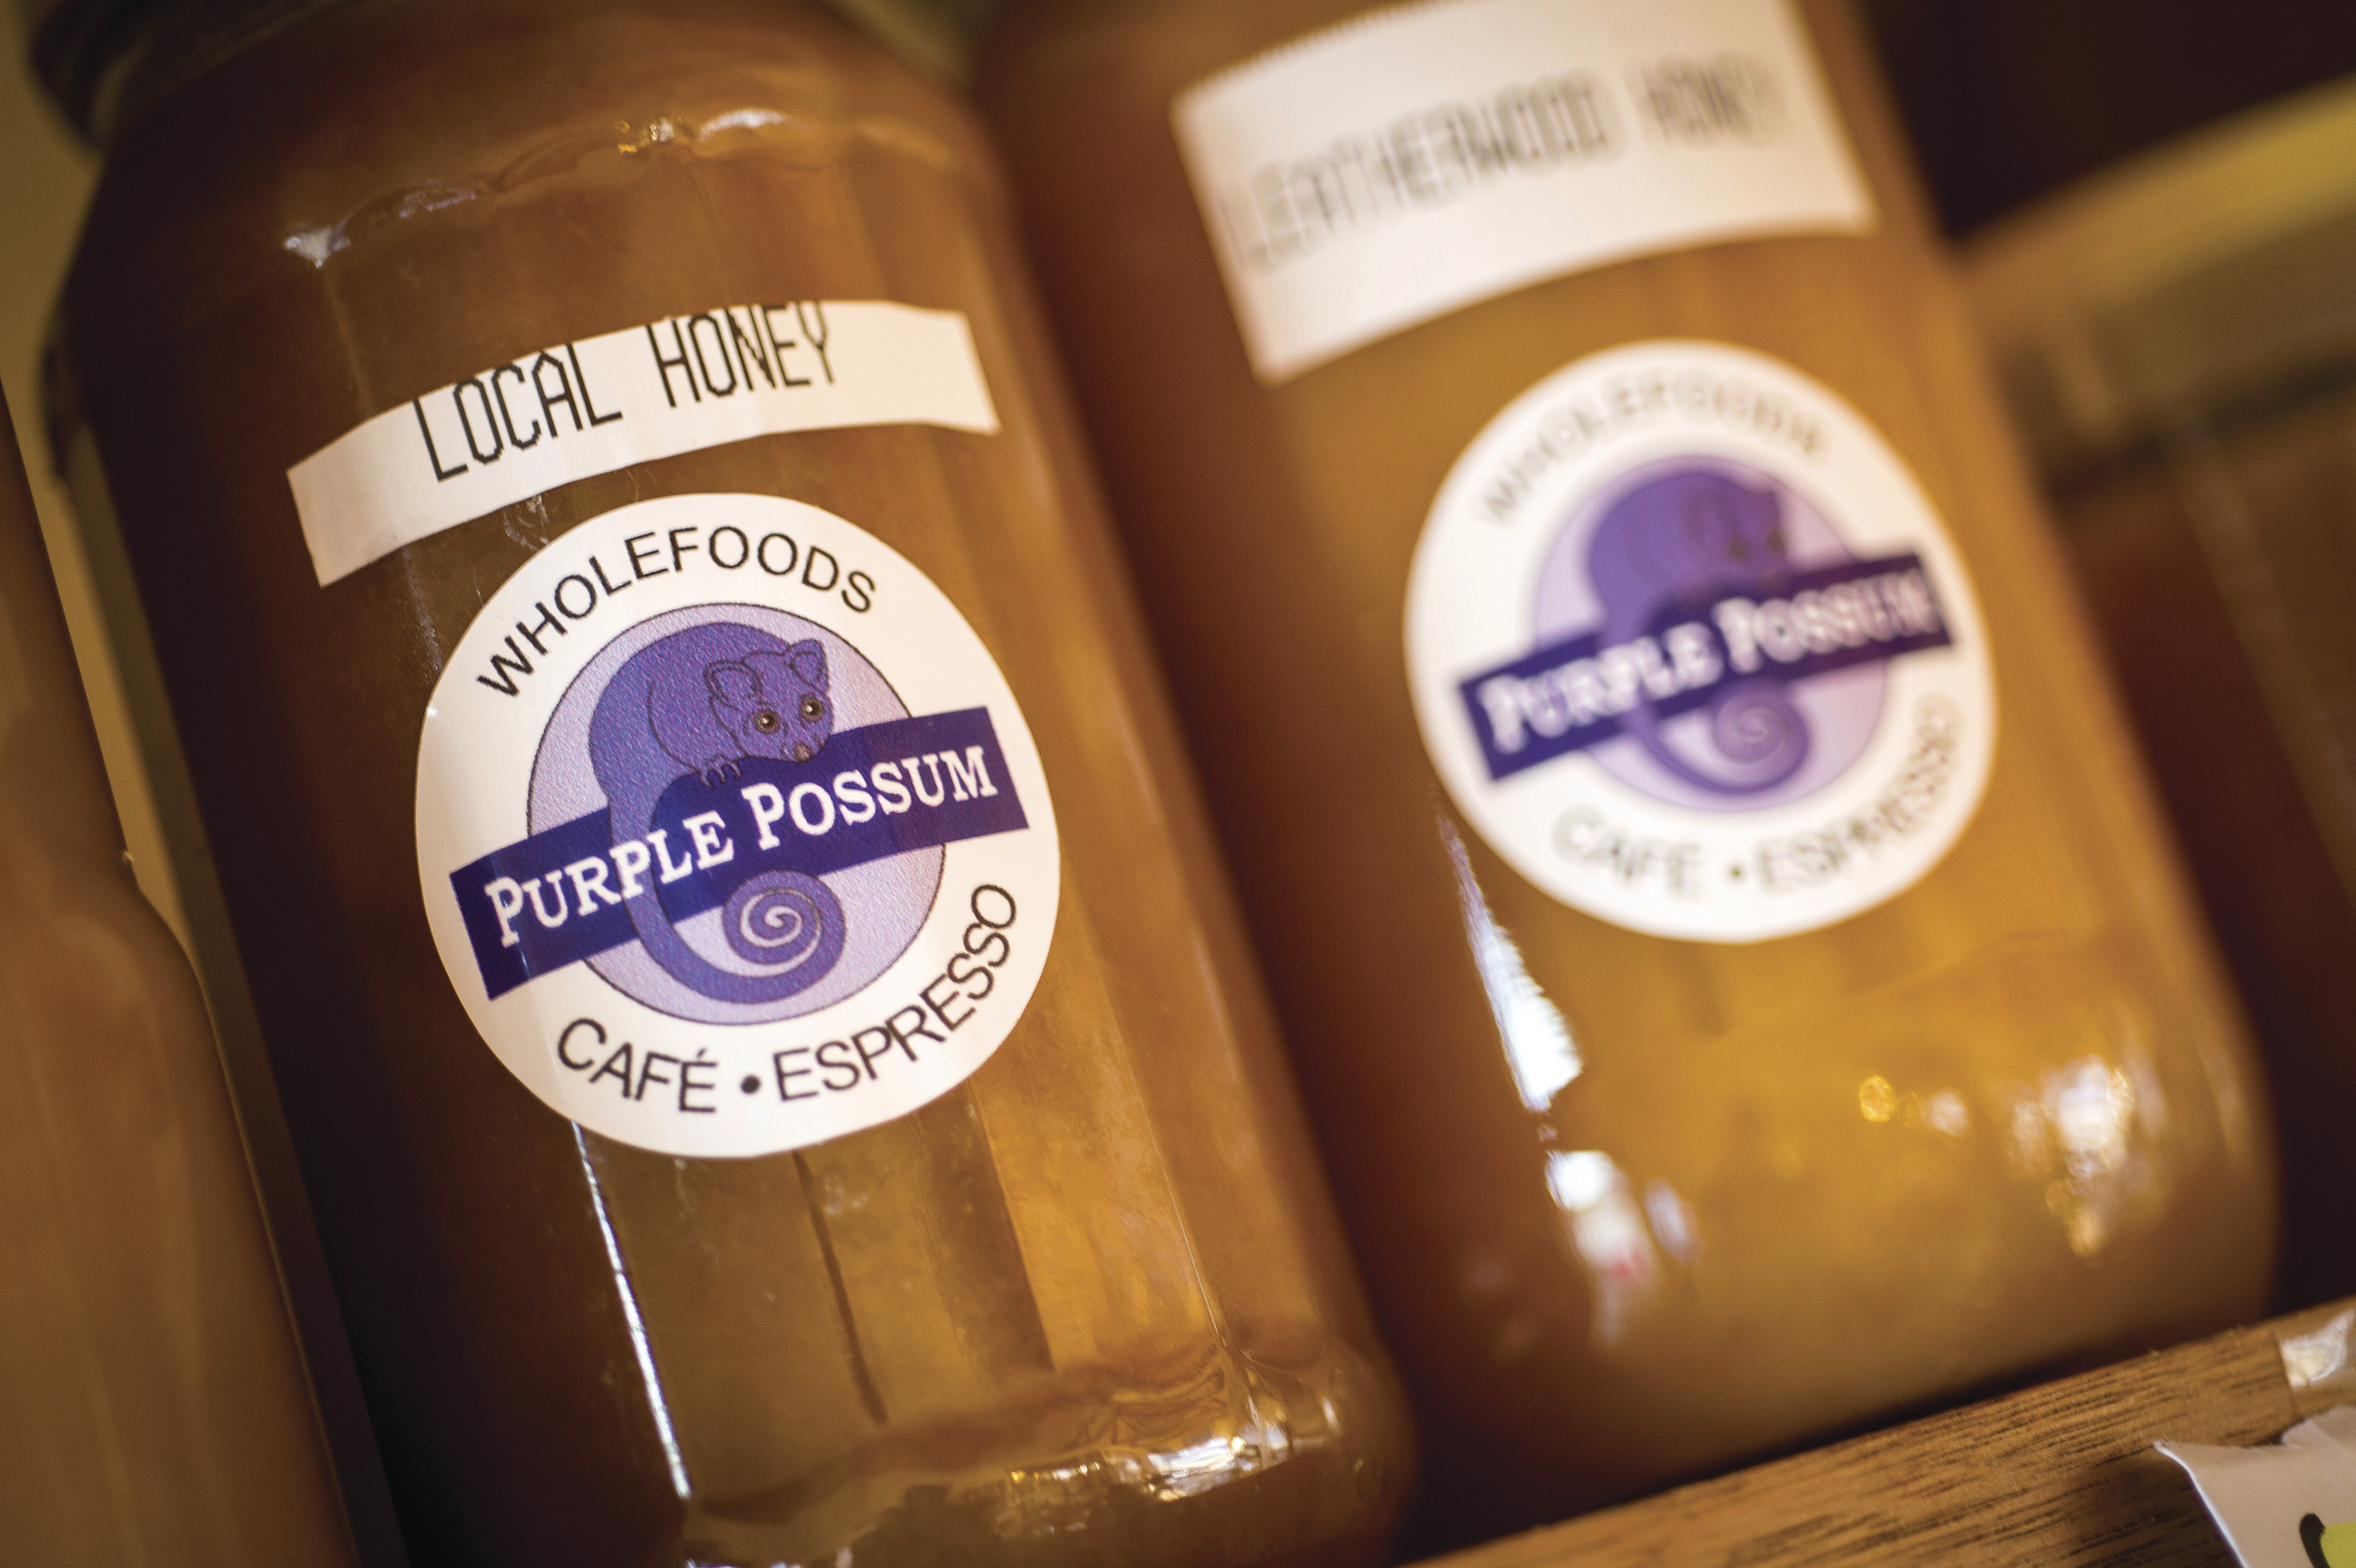 Two bottles of local honey. Called 'purple possum'. From the purple house cafe in St Mary's.